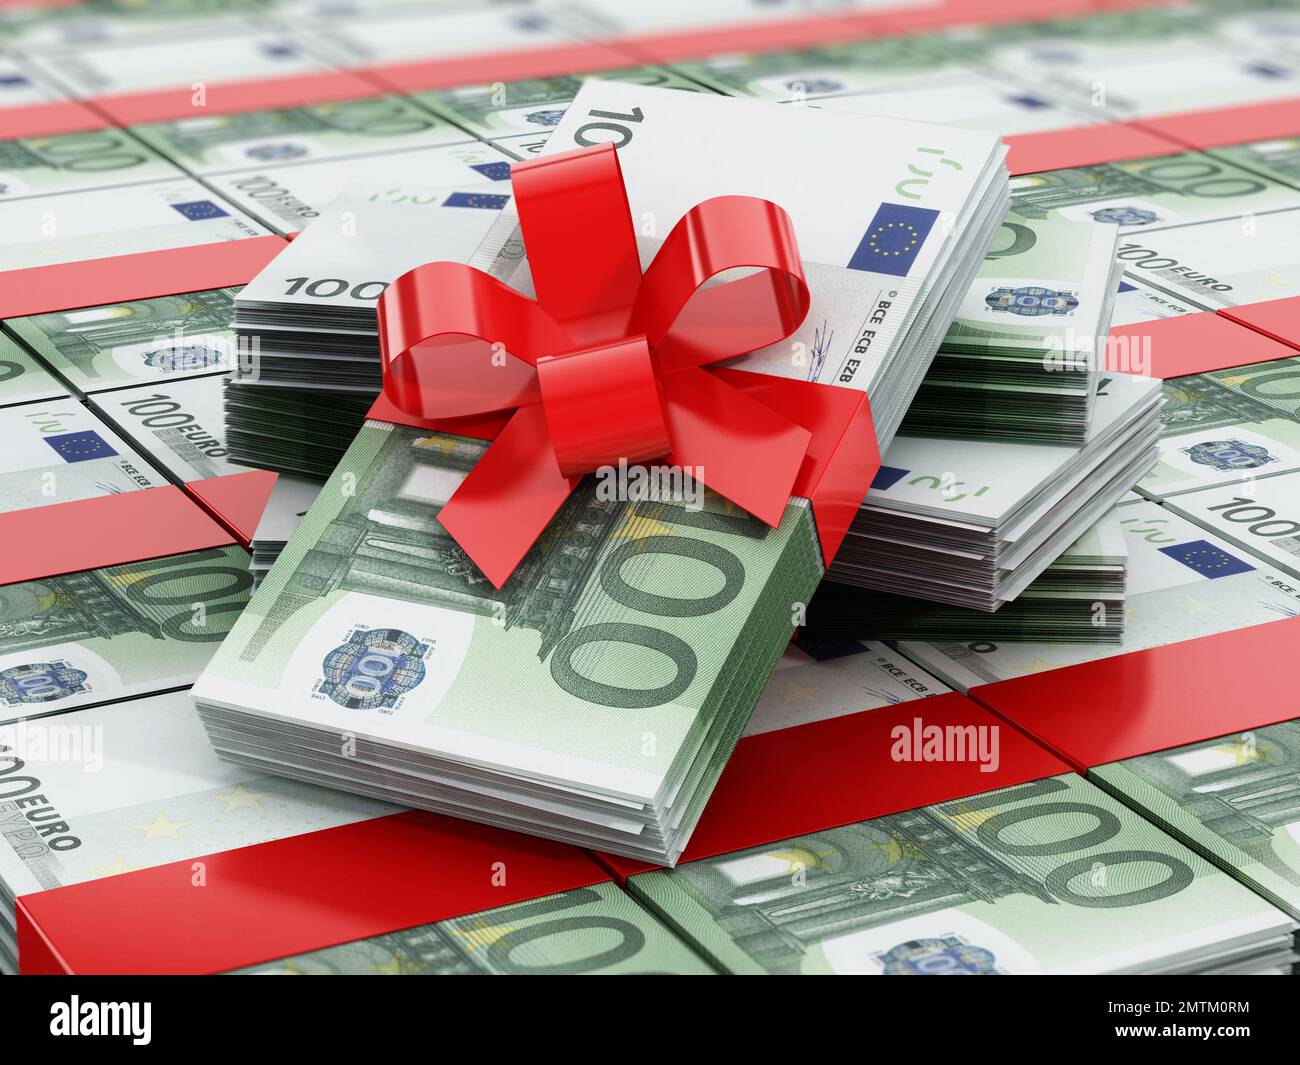 100 euro bills with red ribbon standing on money stack. 3D illustration. Stock Photo